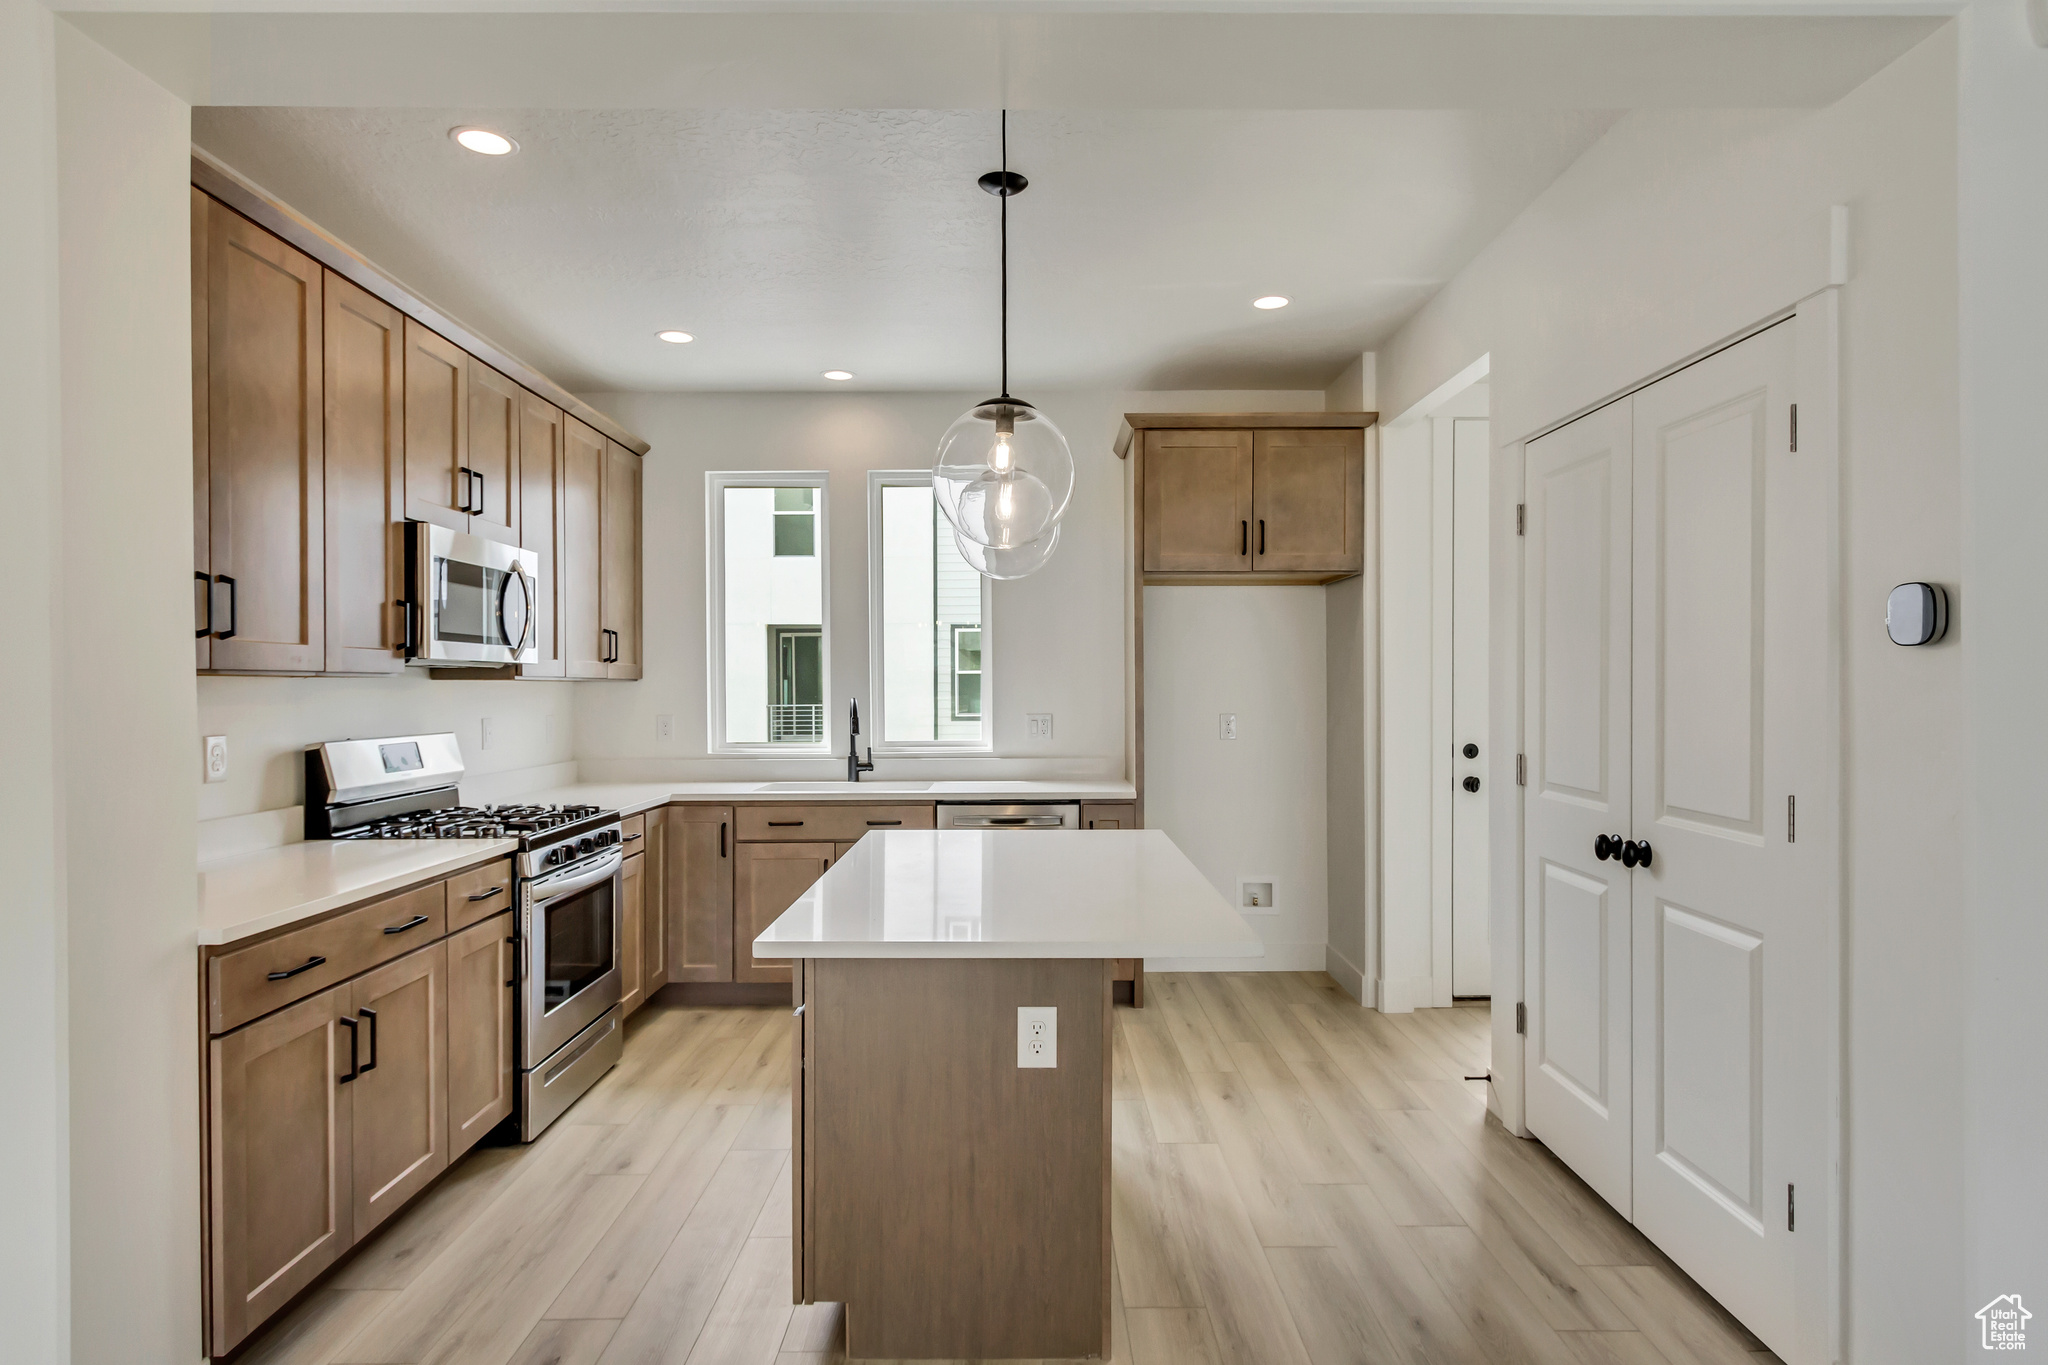 Kitchen with a center island, stainless steel appliances, light hardwood / wood-style floors, and decorative light fixtures